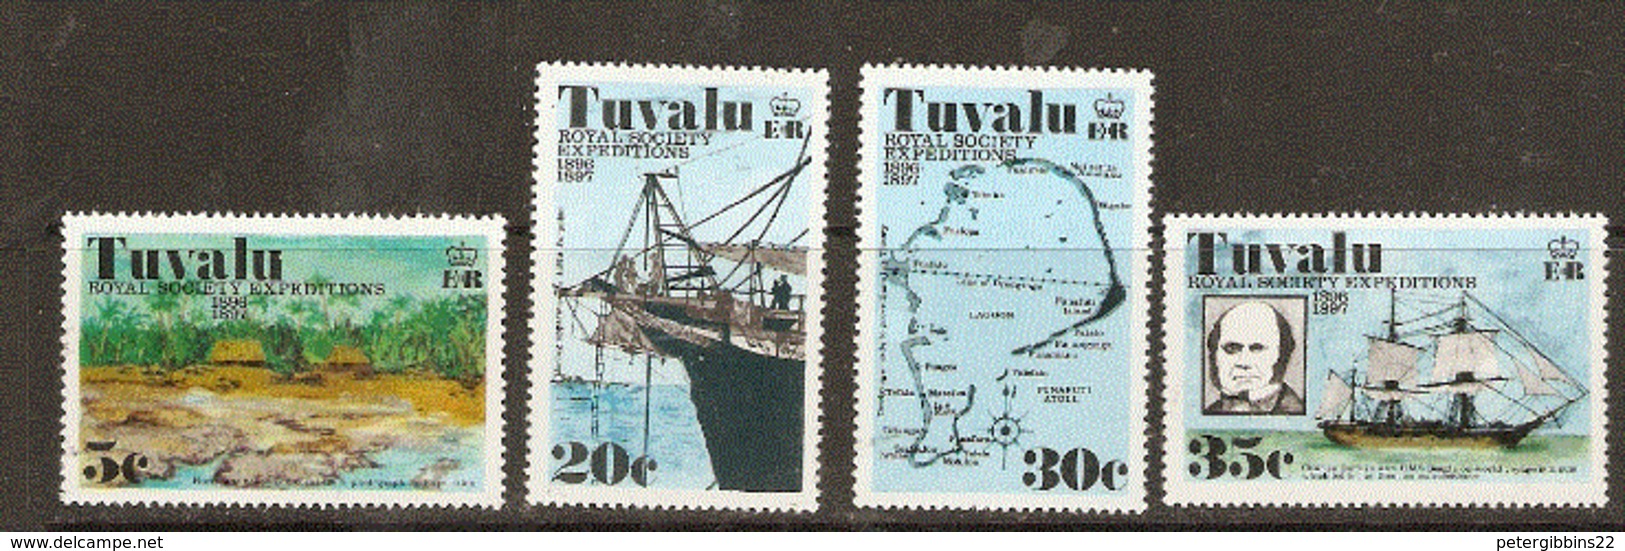 Tuvalu  1976  SG  77-80  Royal Society Expedition  Unmounted Mint - Tuvalu